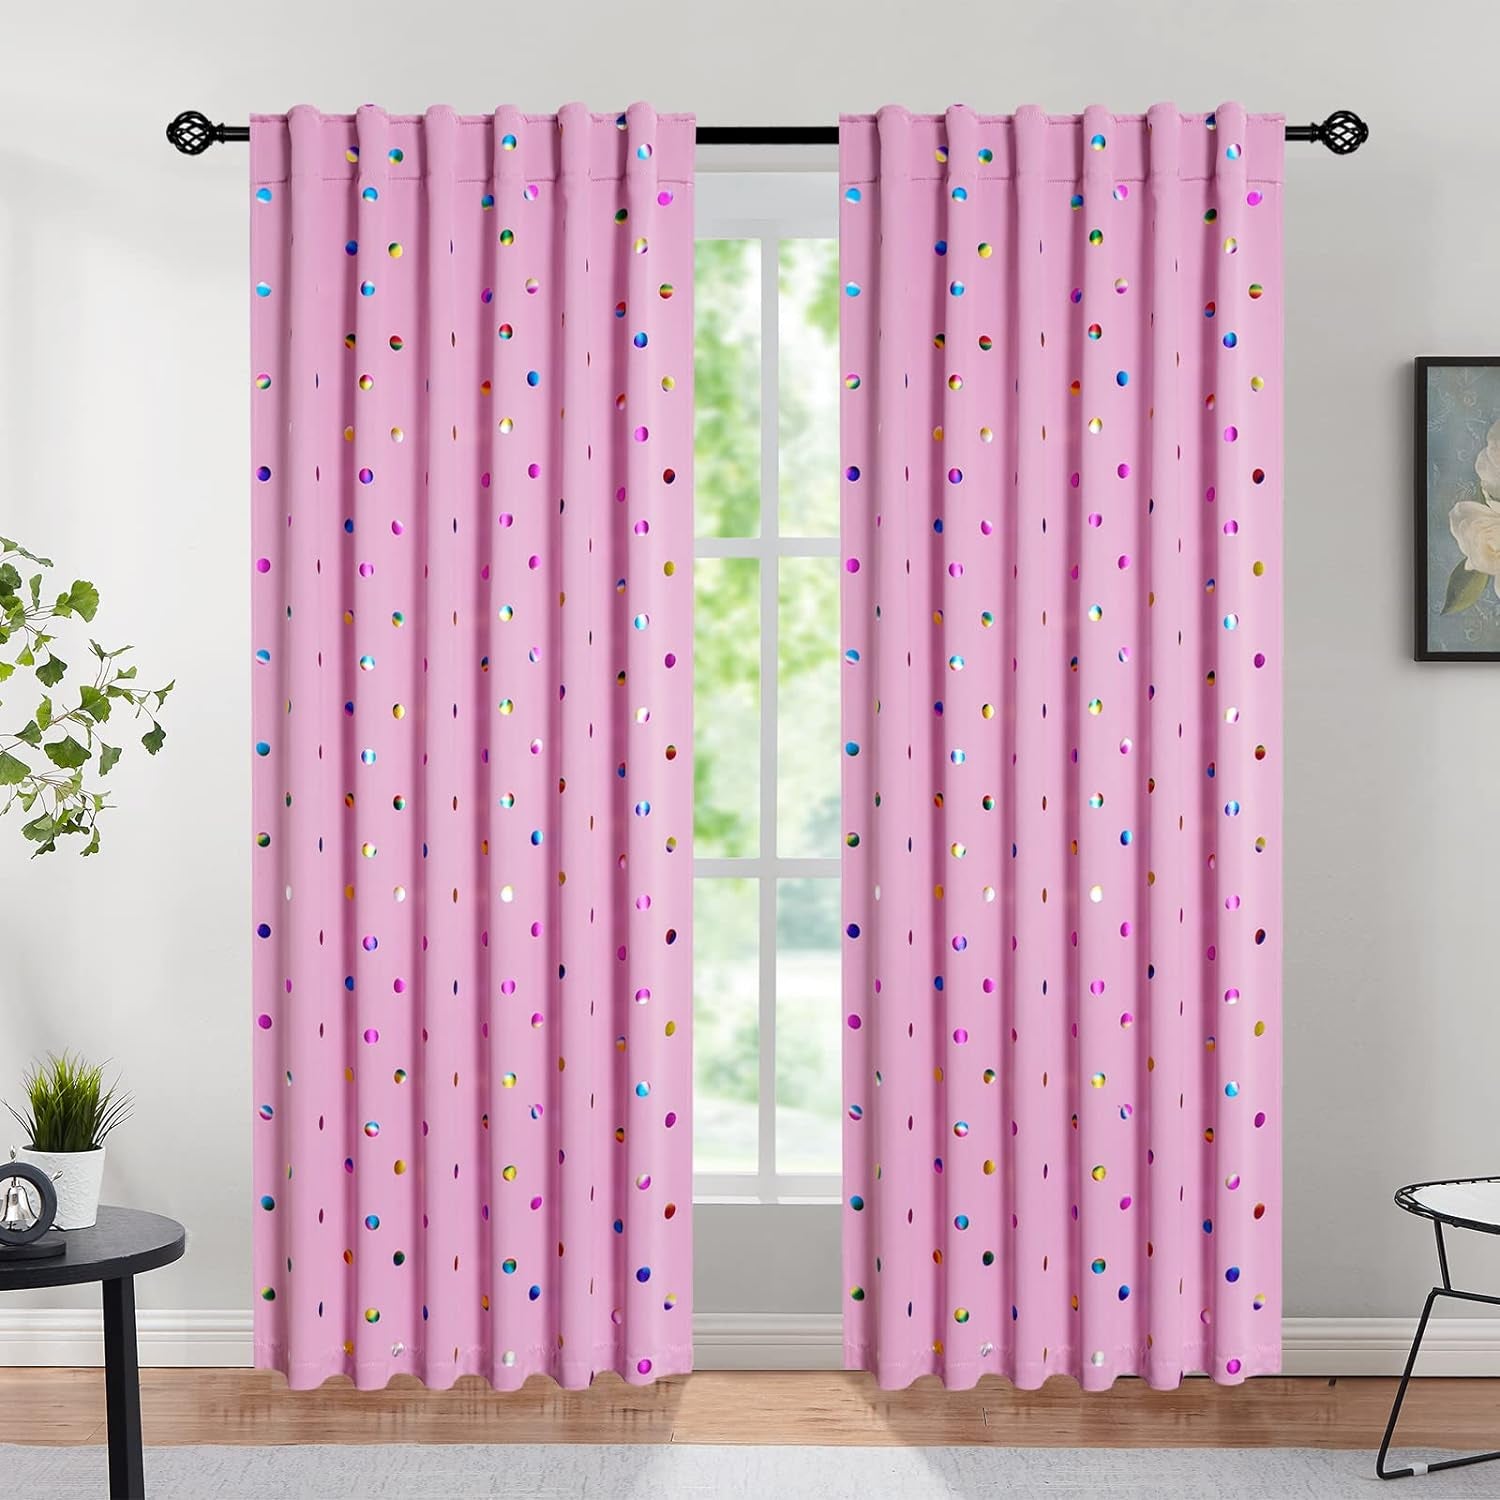 Black Blackout Curtains for Bedroom Living-Room Holiday Season Metallic Polka Dots Pattern Curtains for Nursery 52 X 95 Inch Grommet Triple Weave Thermal Insulated Draperies for Kids Bedroom, 2Pcs  Urban Lotus Rod-Pink 52"X95" 